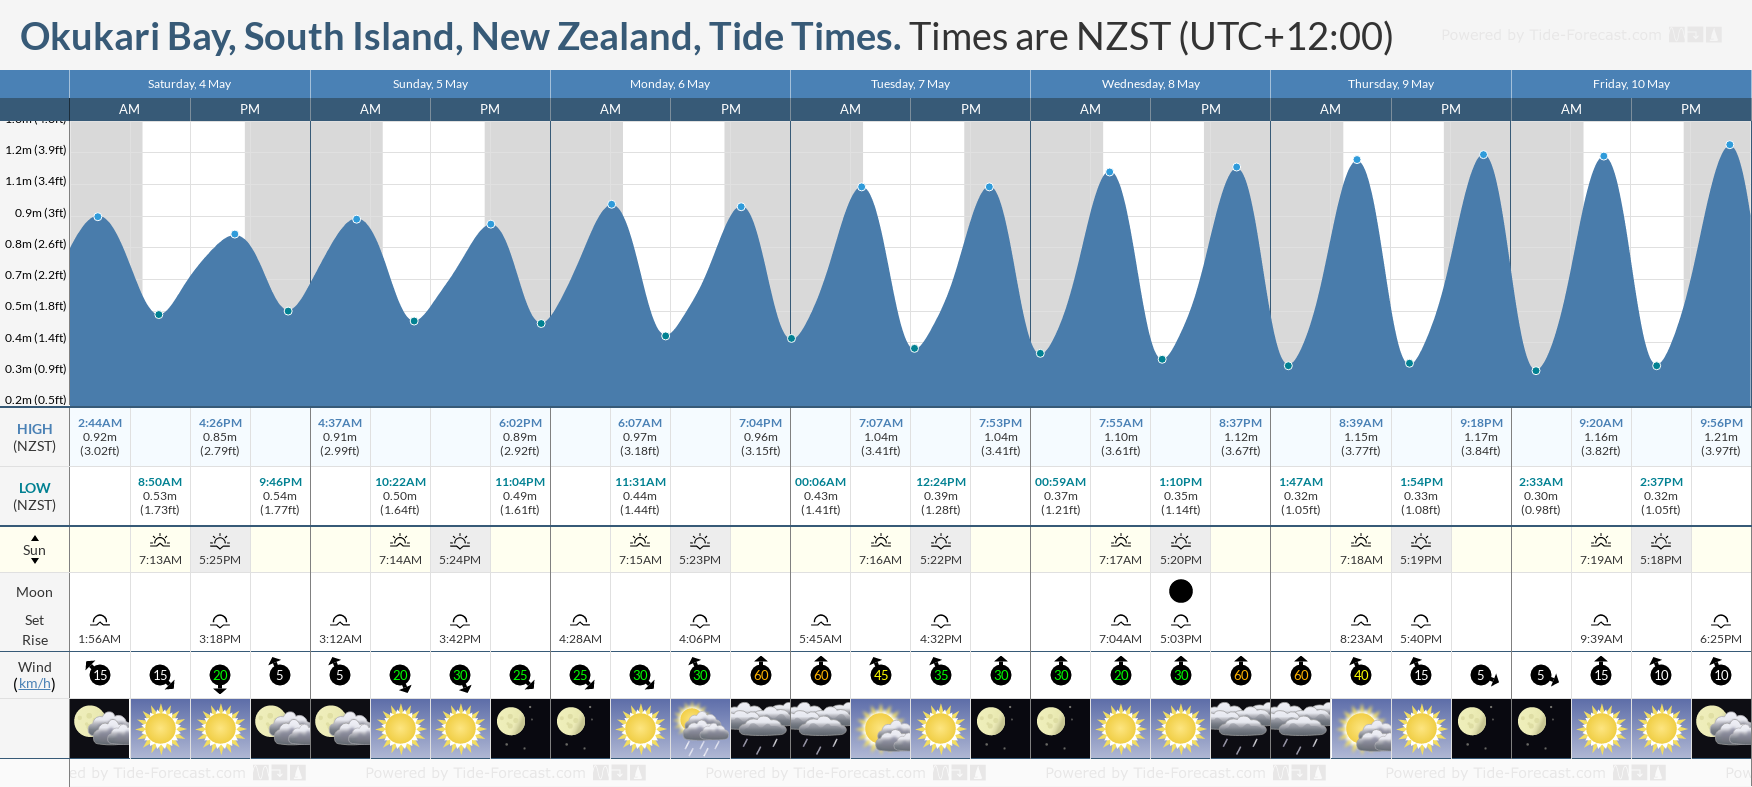 Okukari Bay, South Island, New Zealand Tide Chart including high and low tide times for the next 7 days